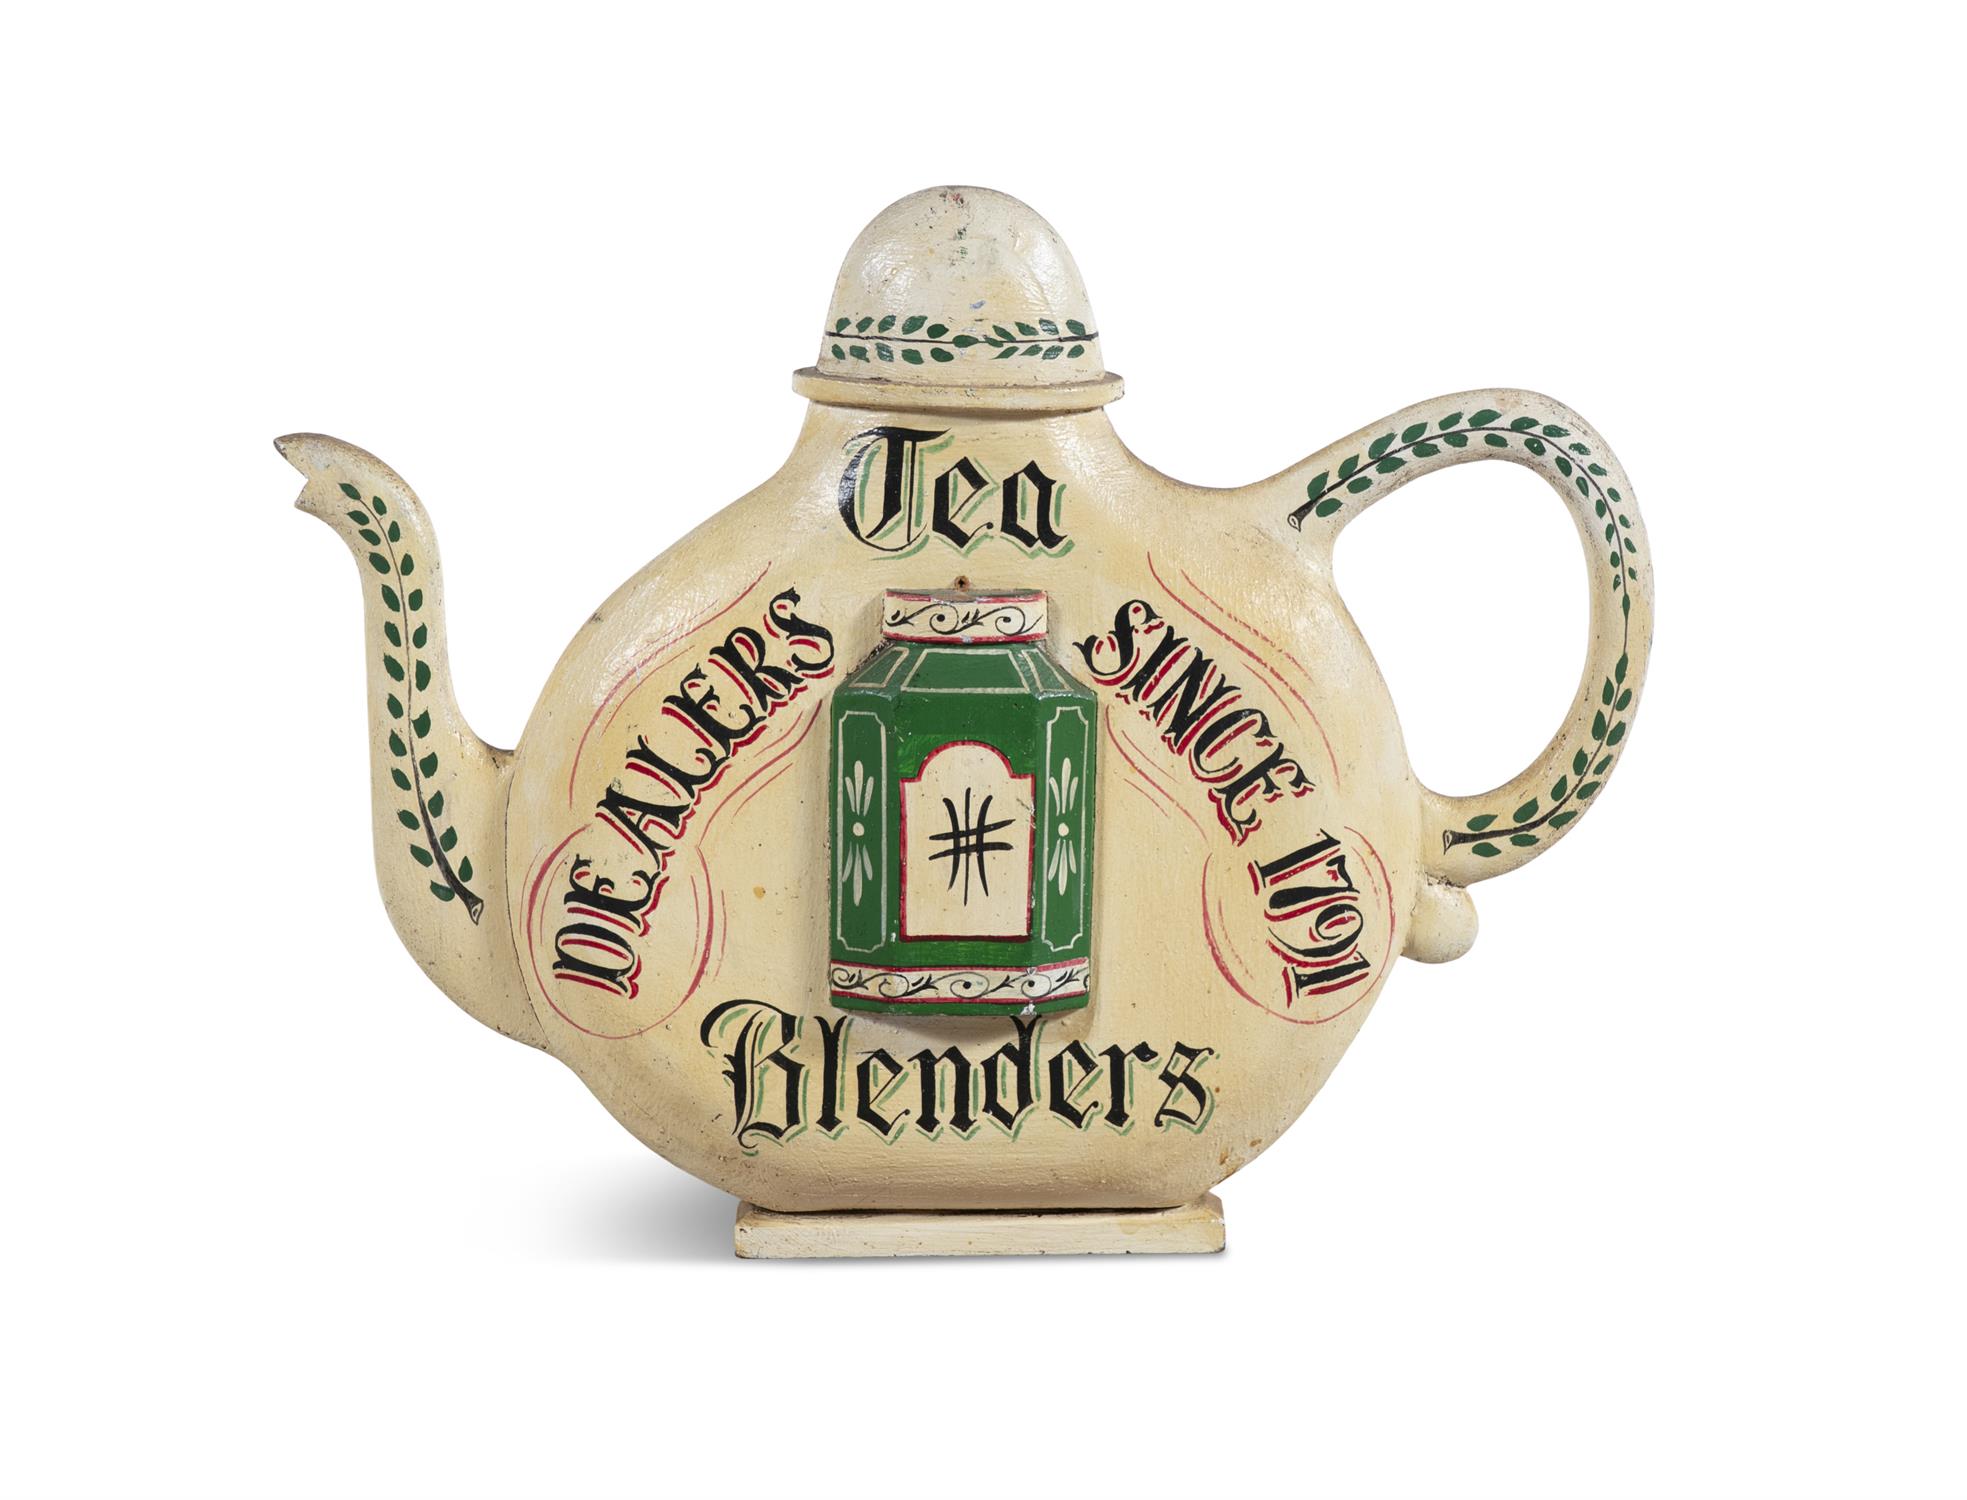 A PAINTED TIMBER SHOP SIGN IN THE FORM OF A TEAPOT, inscribed 'Tea Blenders - Dealers Since